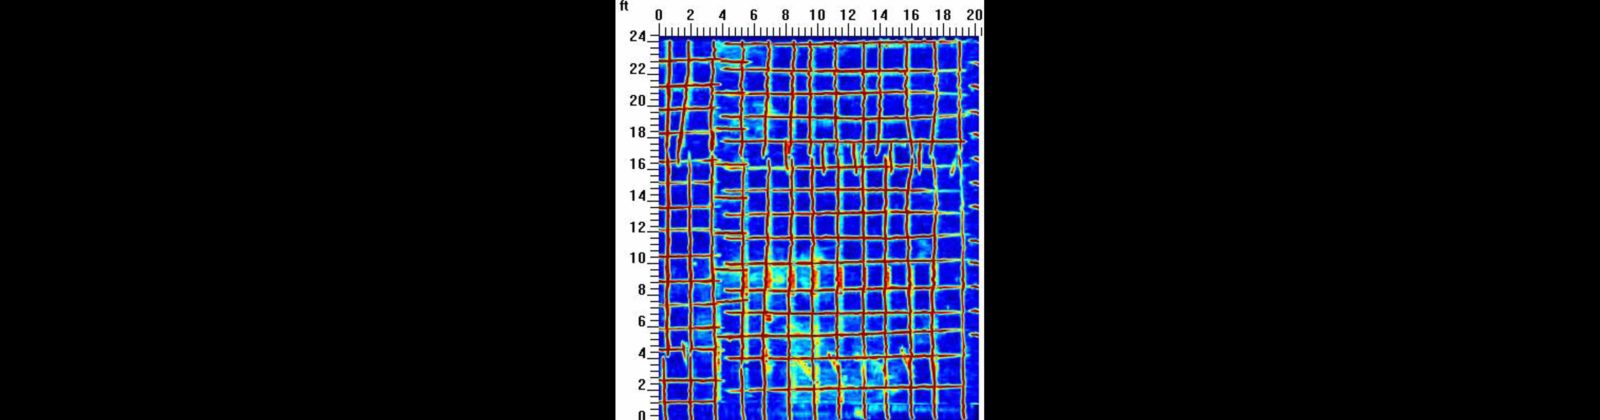 Concrete Scanning Results of the 20 x 25 ft Room to Avoid Rebar